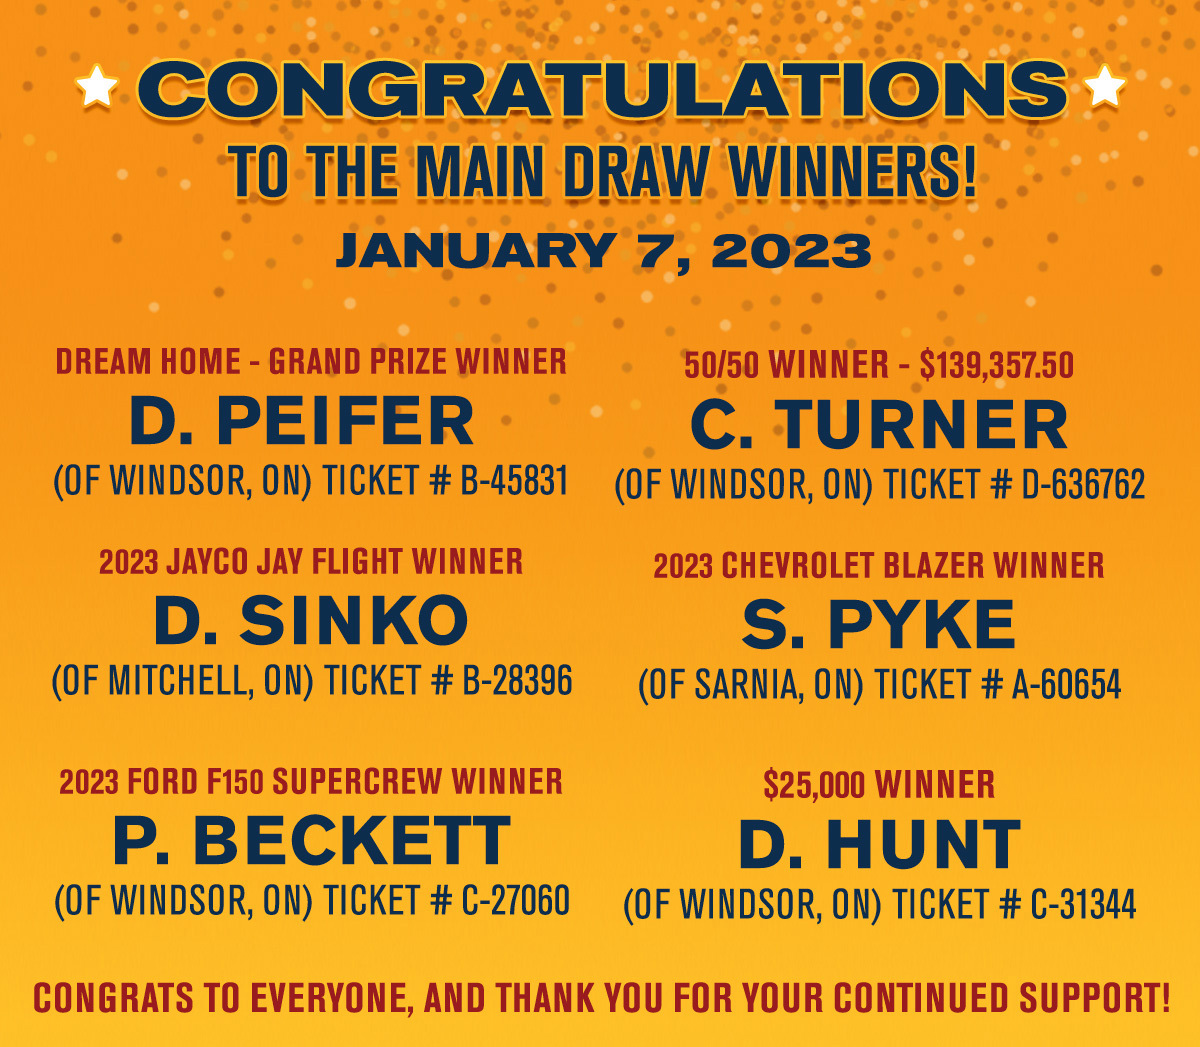 Congratulations to the Main Draw Winners!